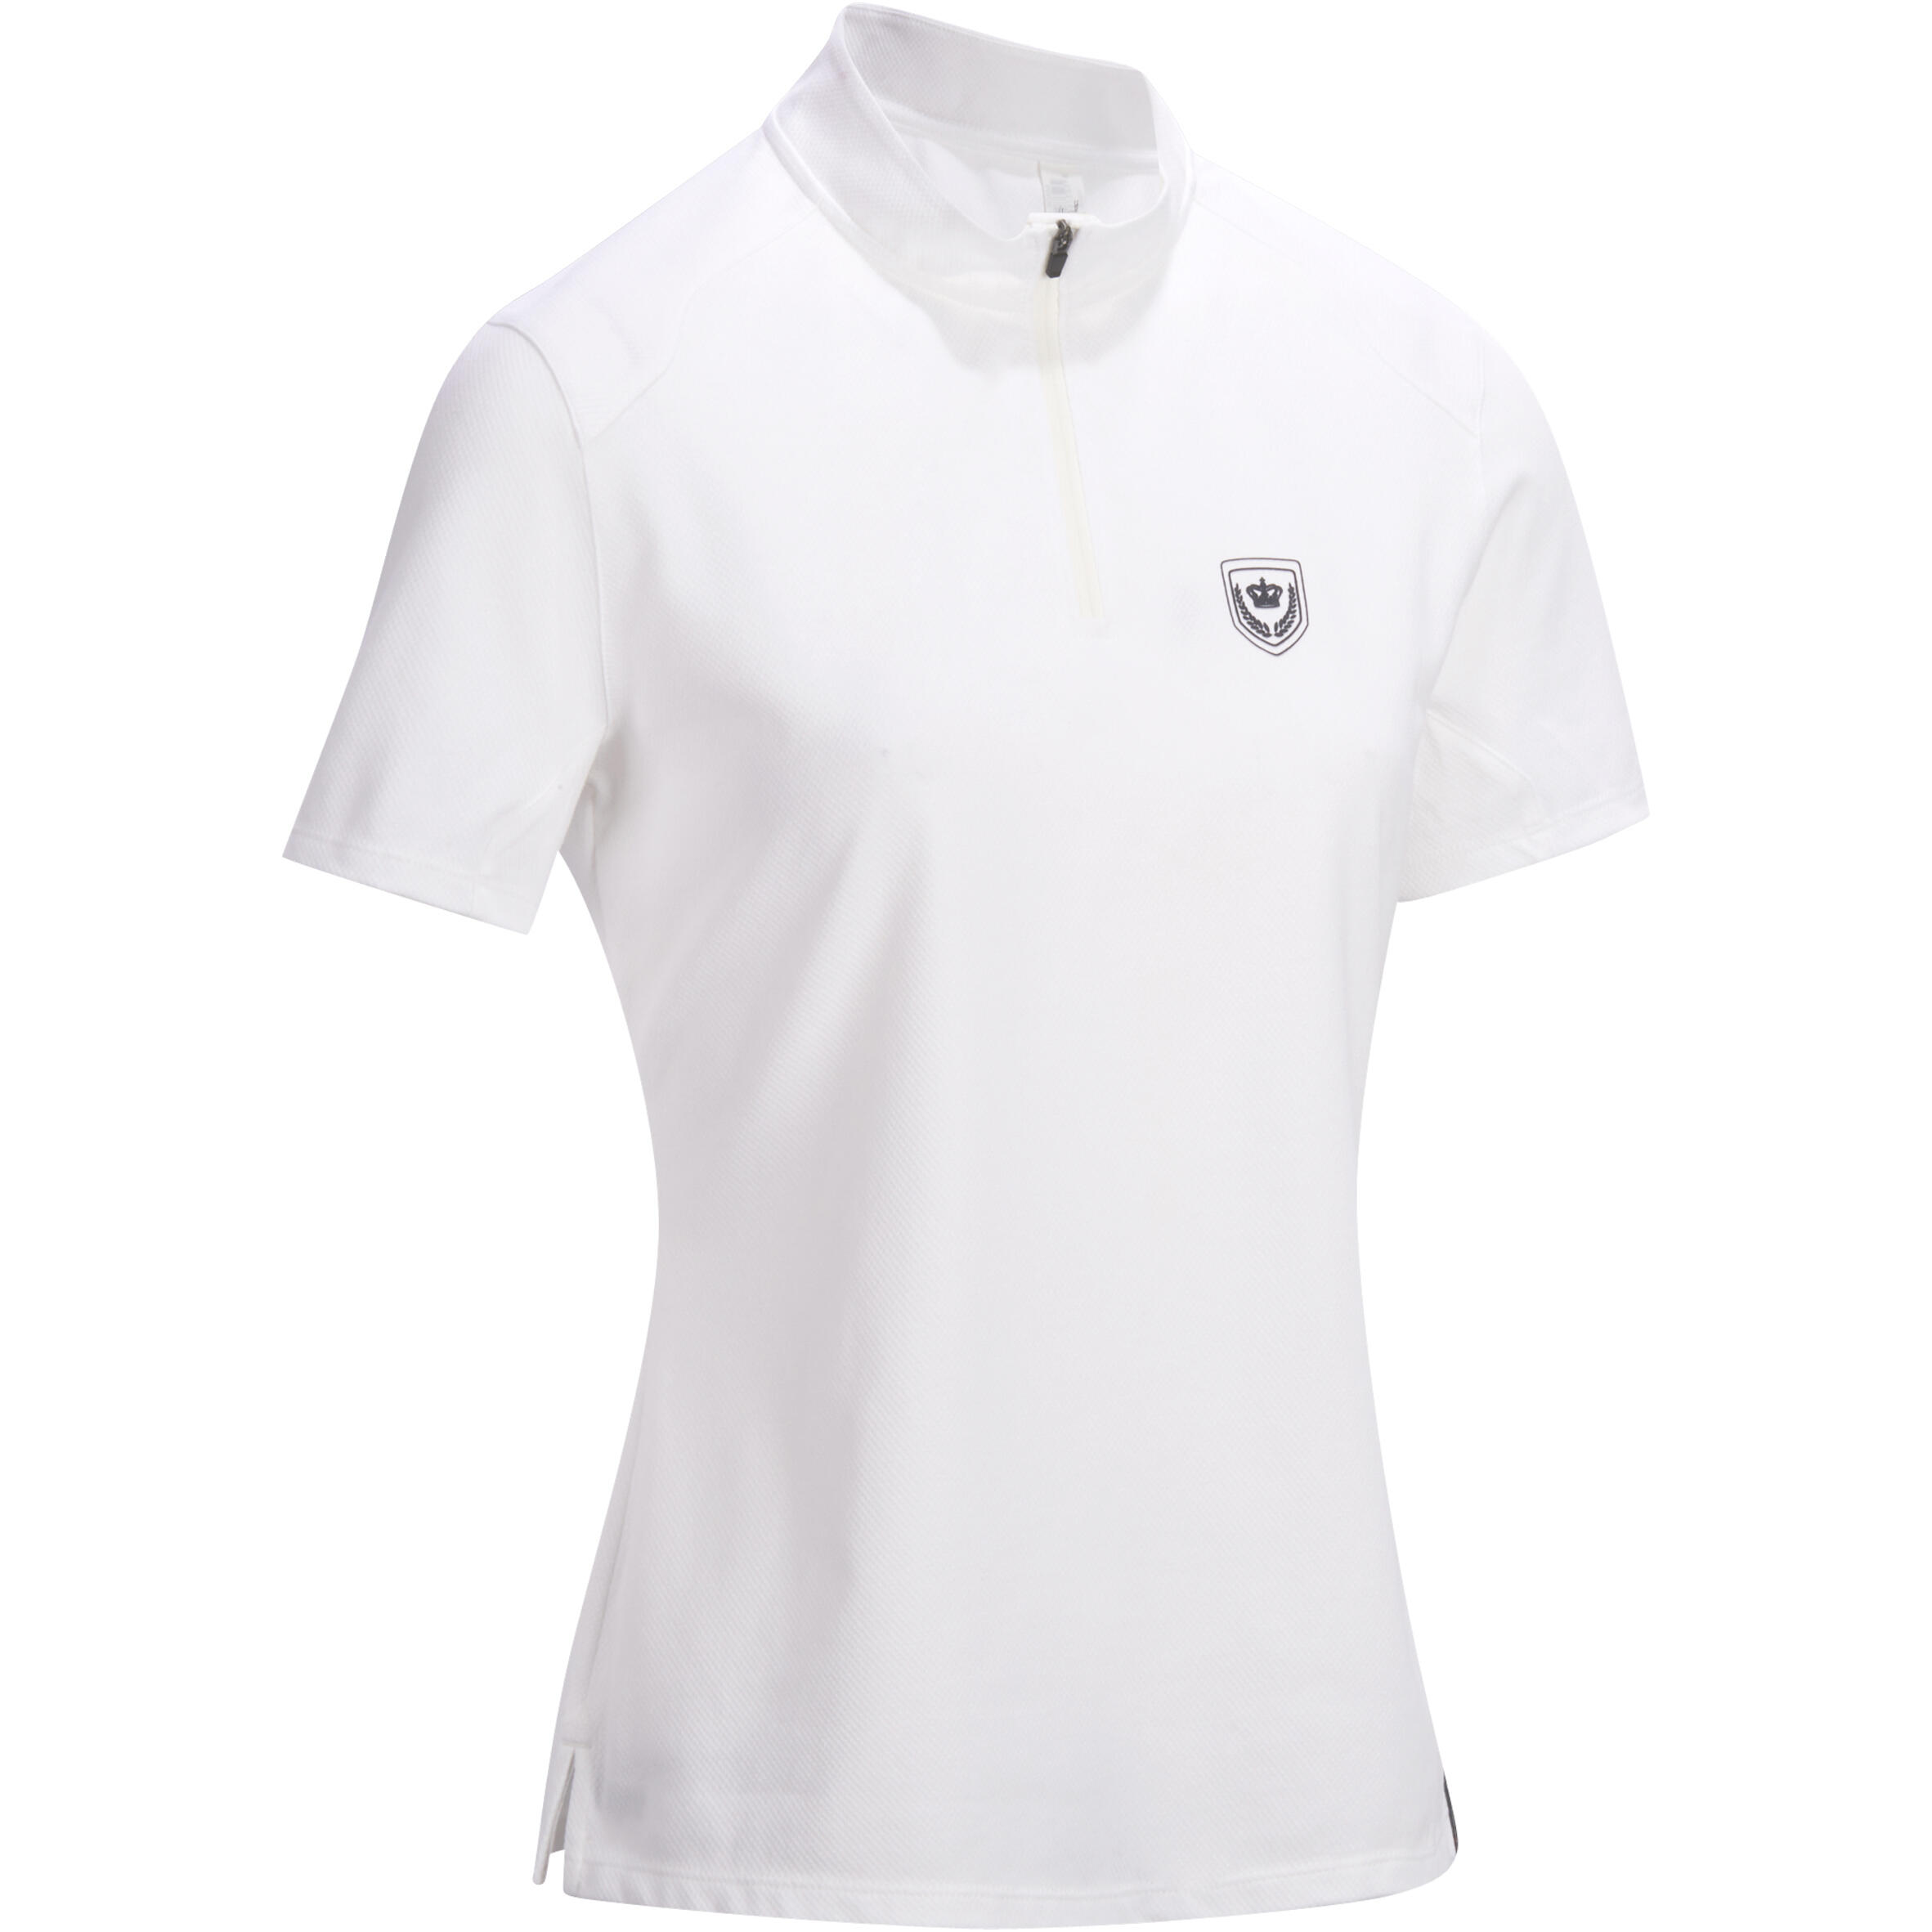 FOUGANZA 500 Women's Short-Sleeved Horse Riding Competition Polo Shirt - White